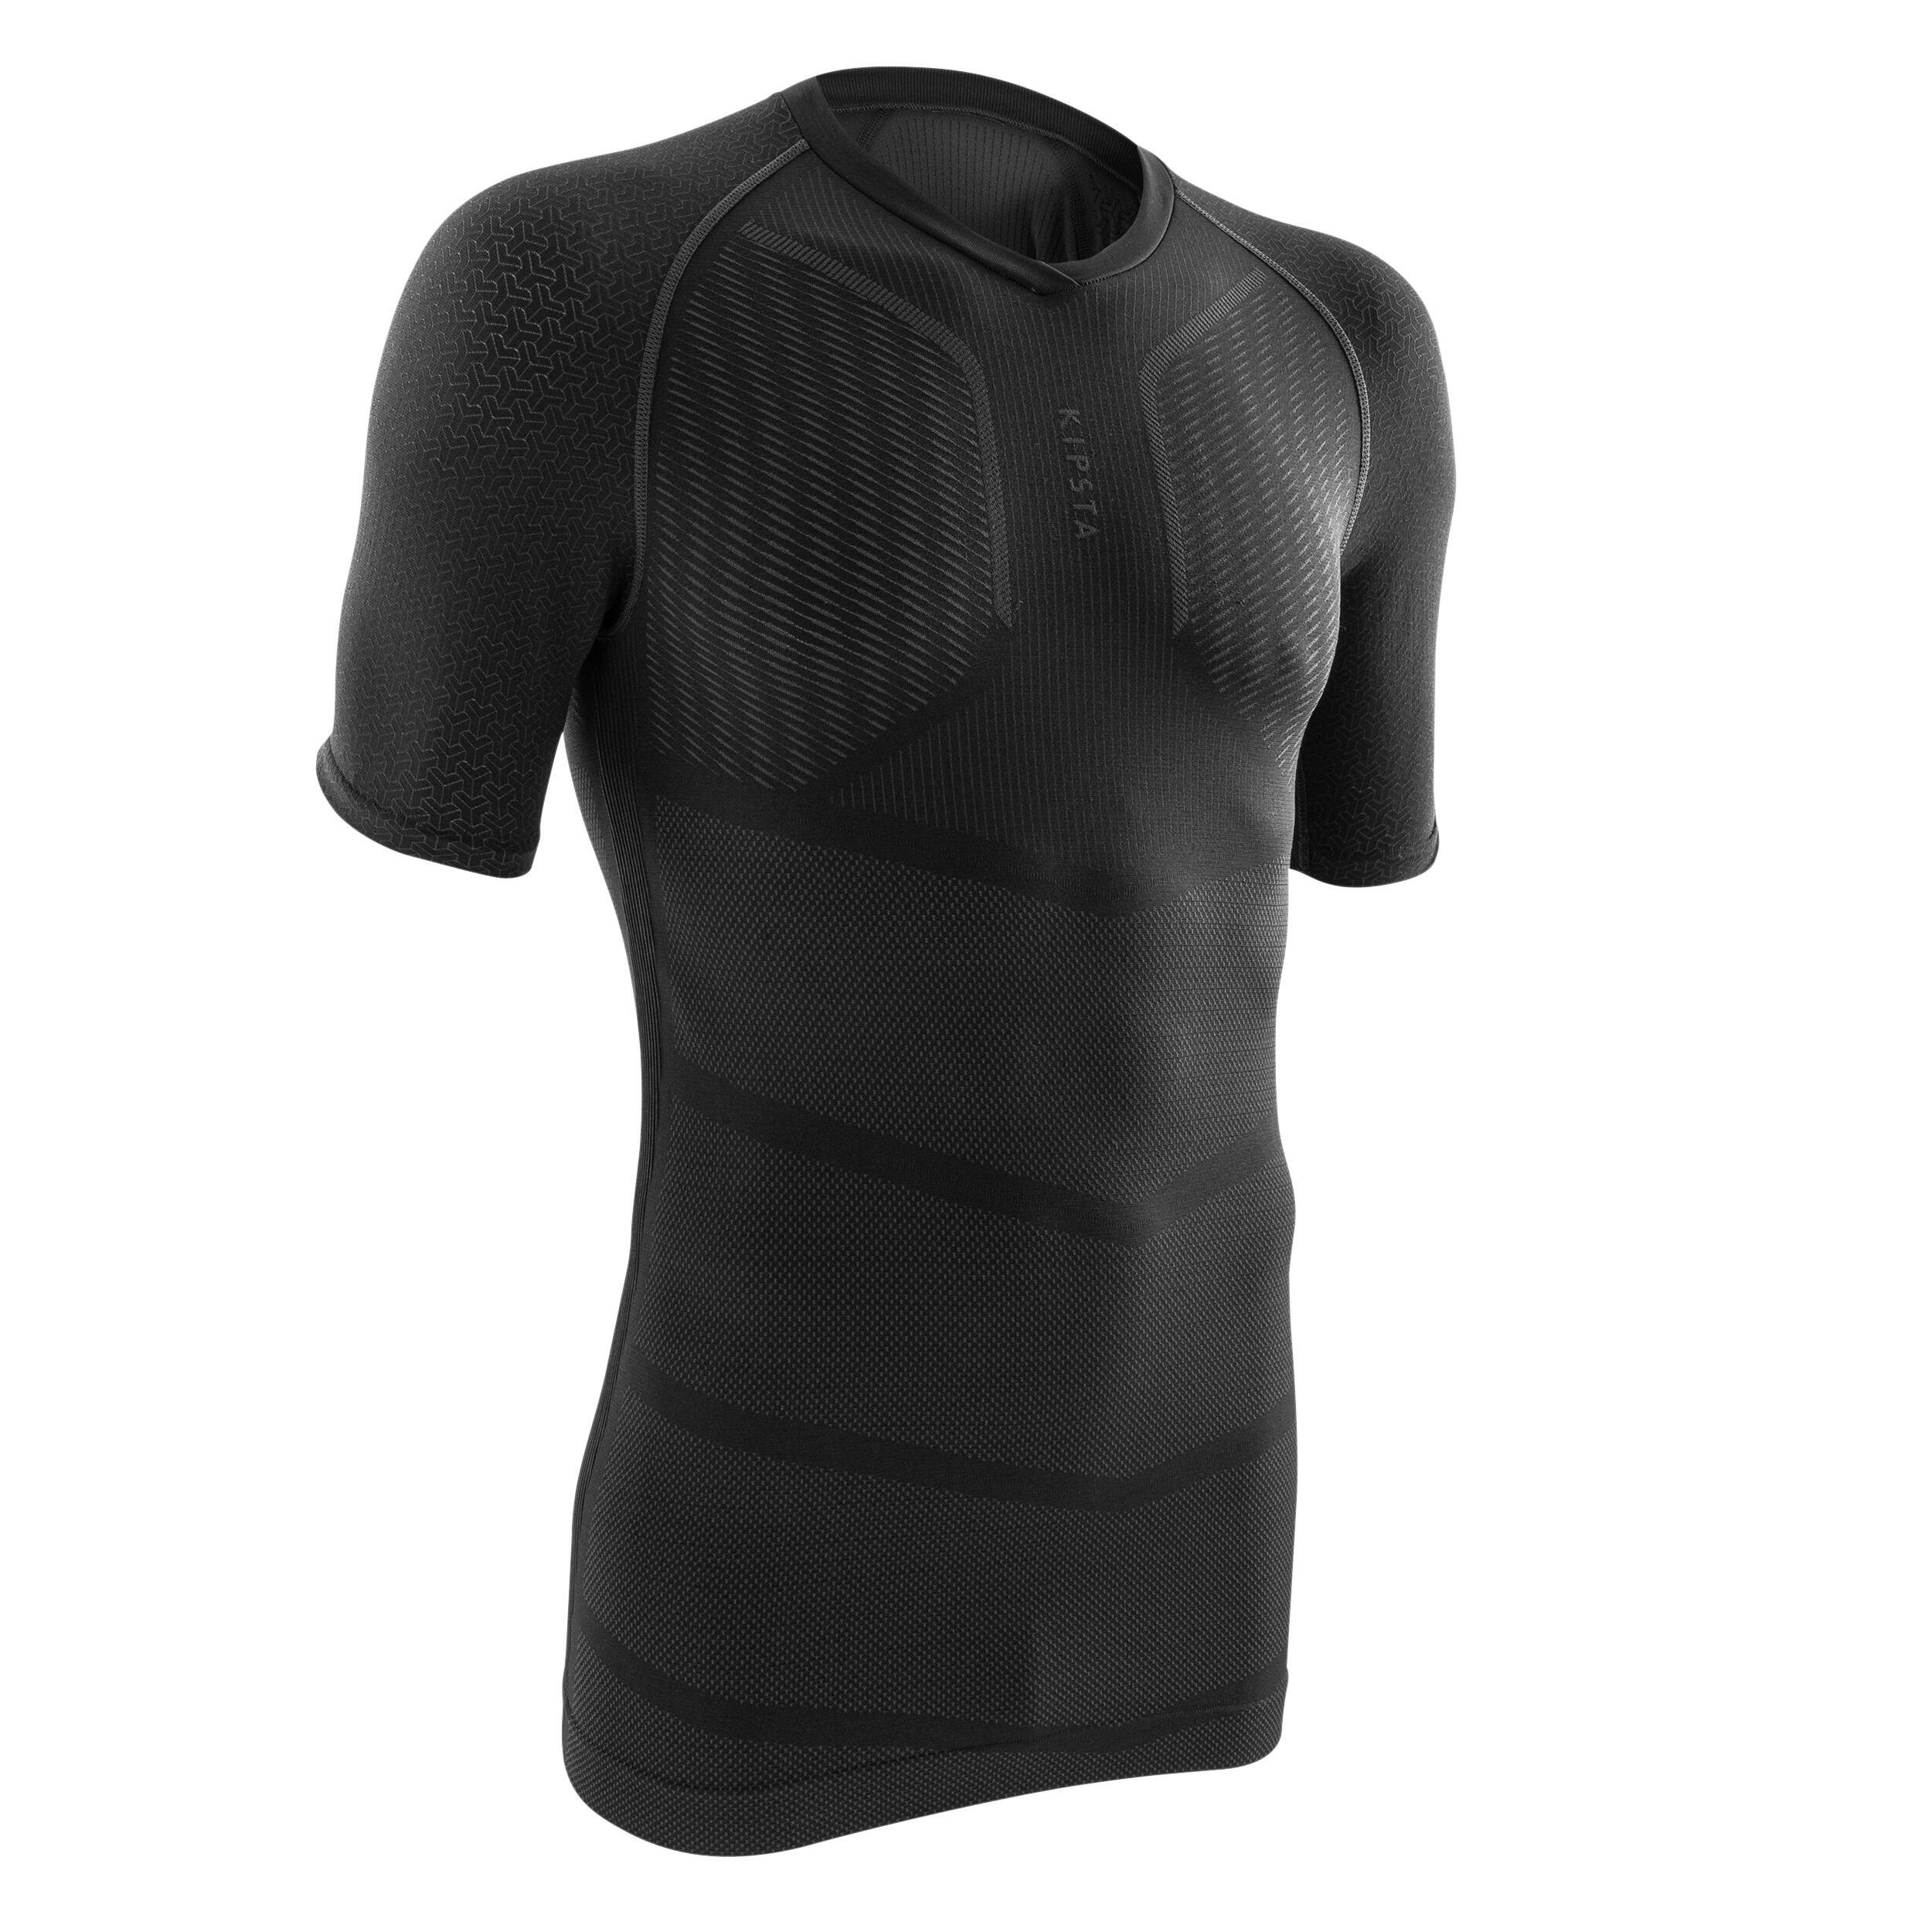 Adult Short-Sleeved Thermal Base Layer Top Keepdry 500 - Black 1/5